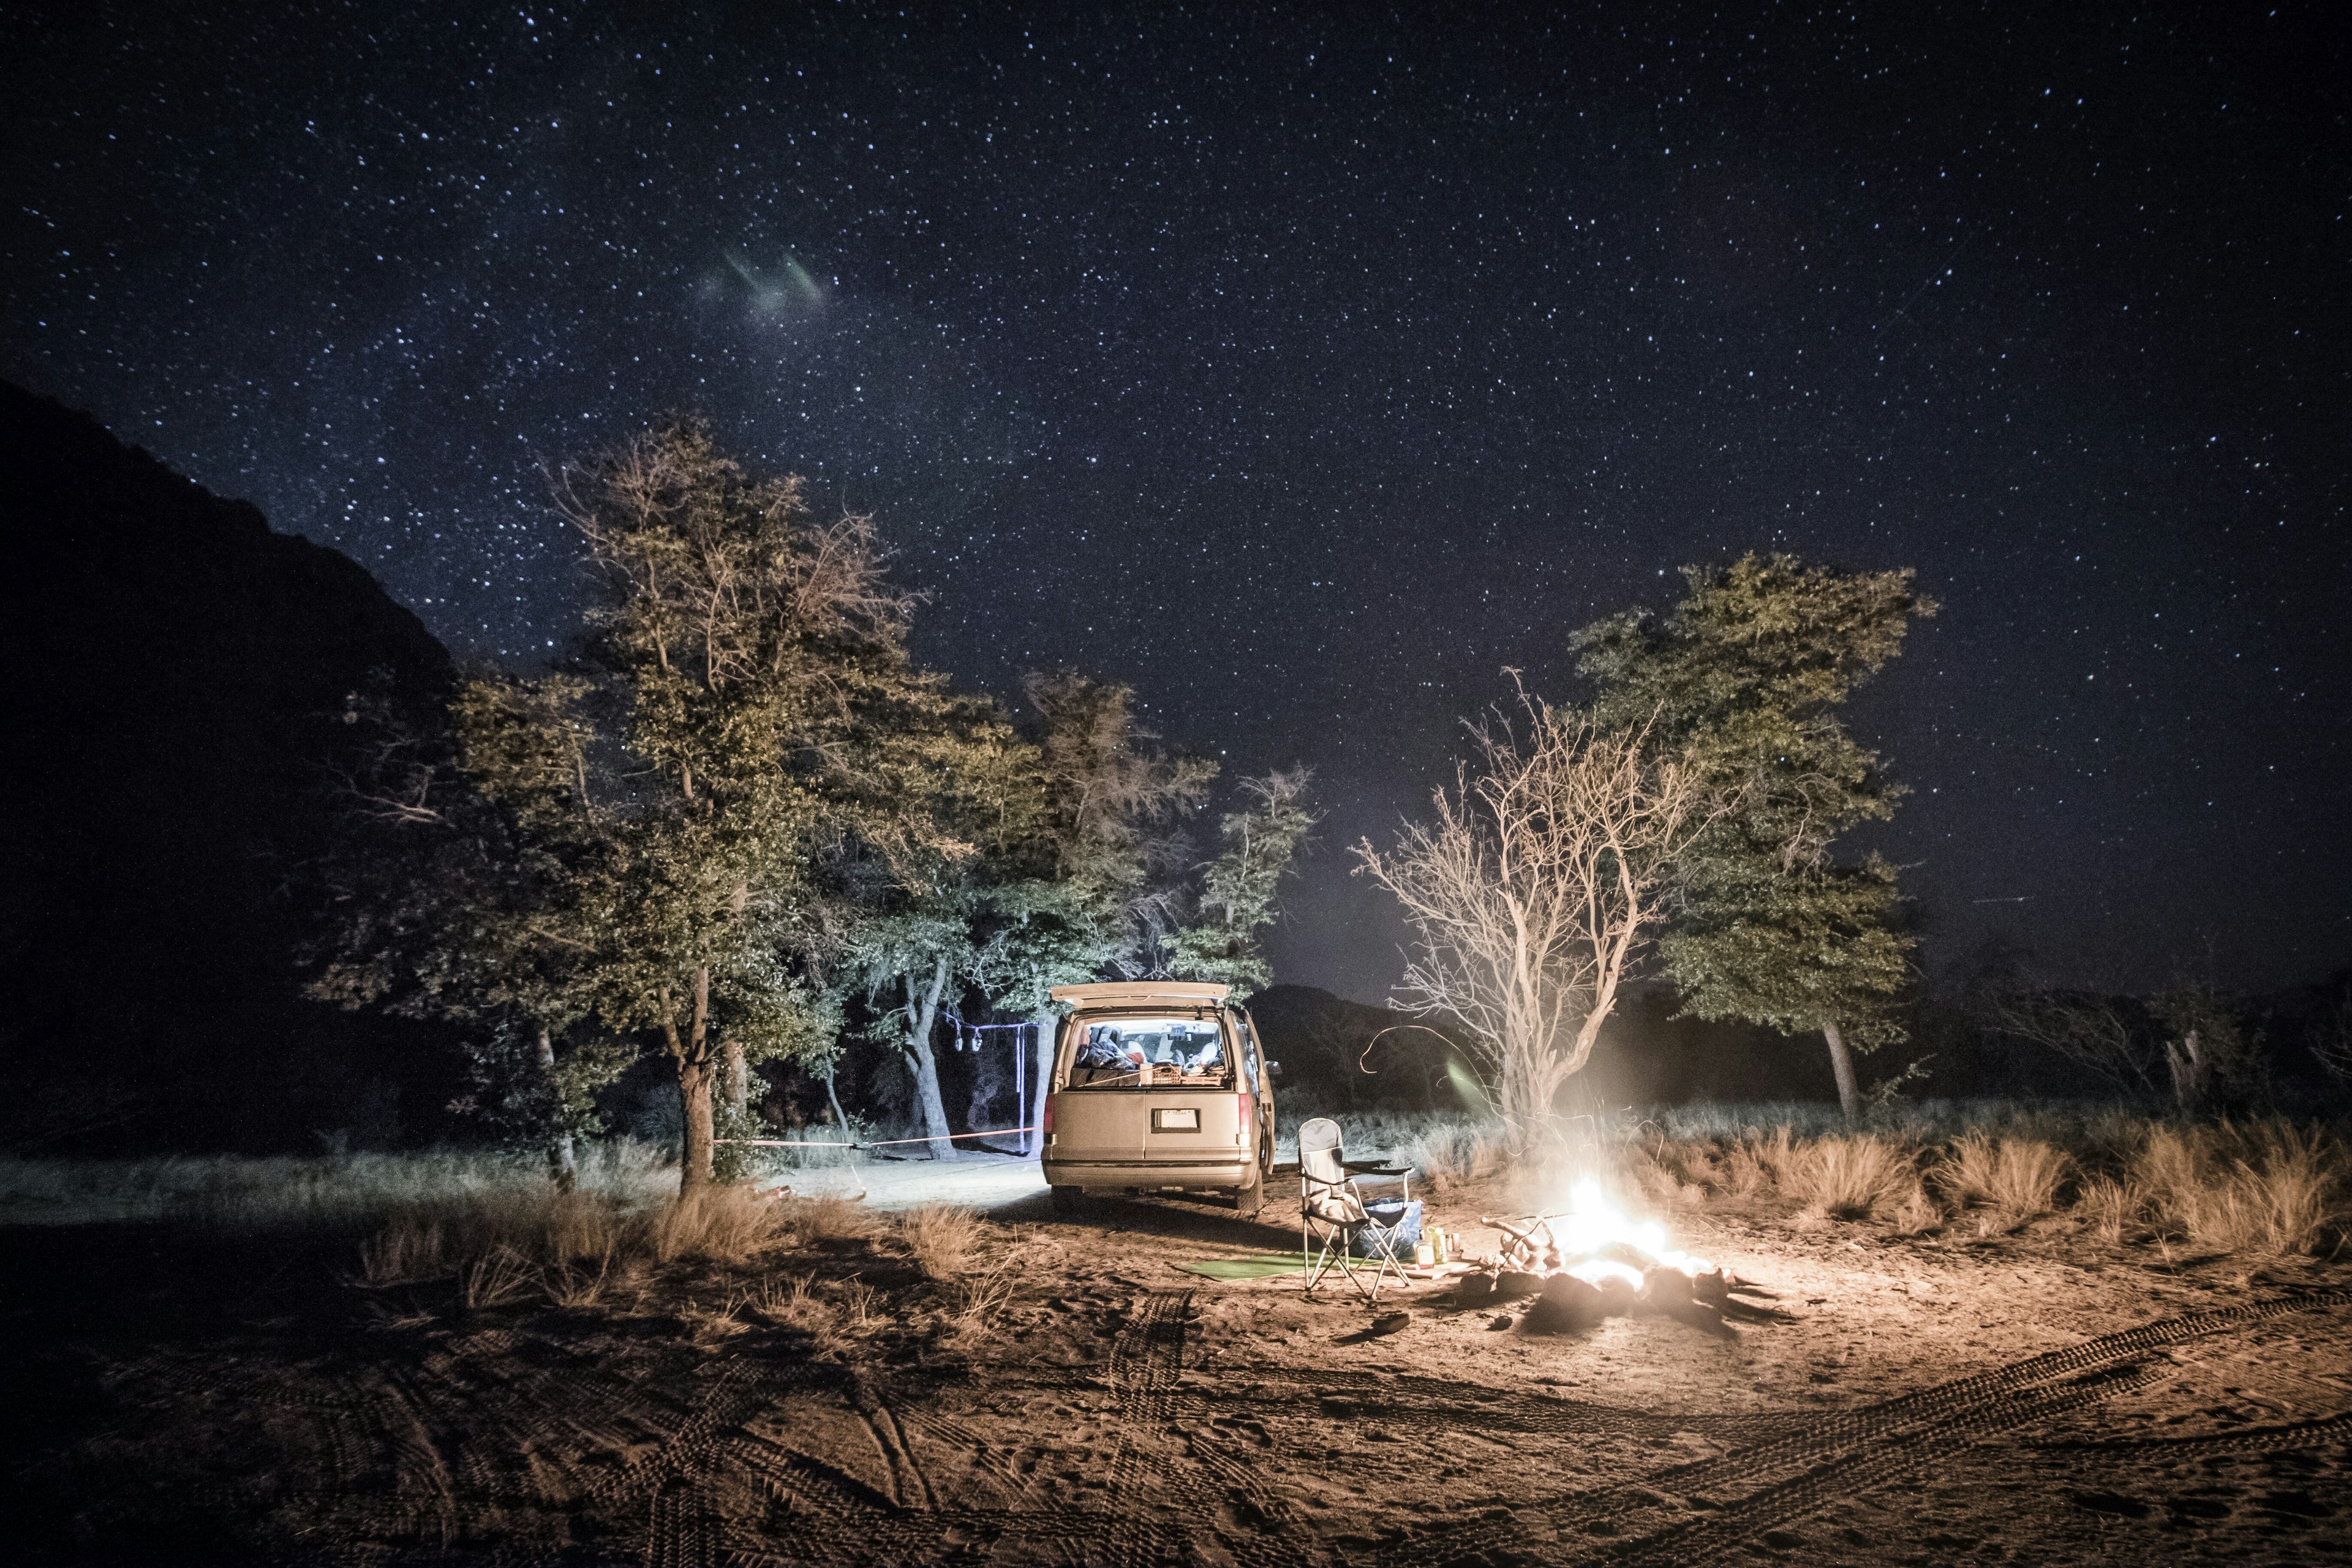 A campervan and fire under the stars at Cochise Stronghold camp in Arizona.